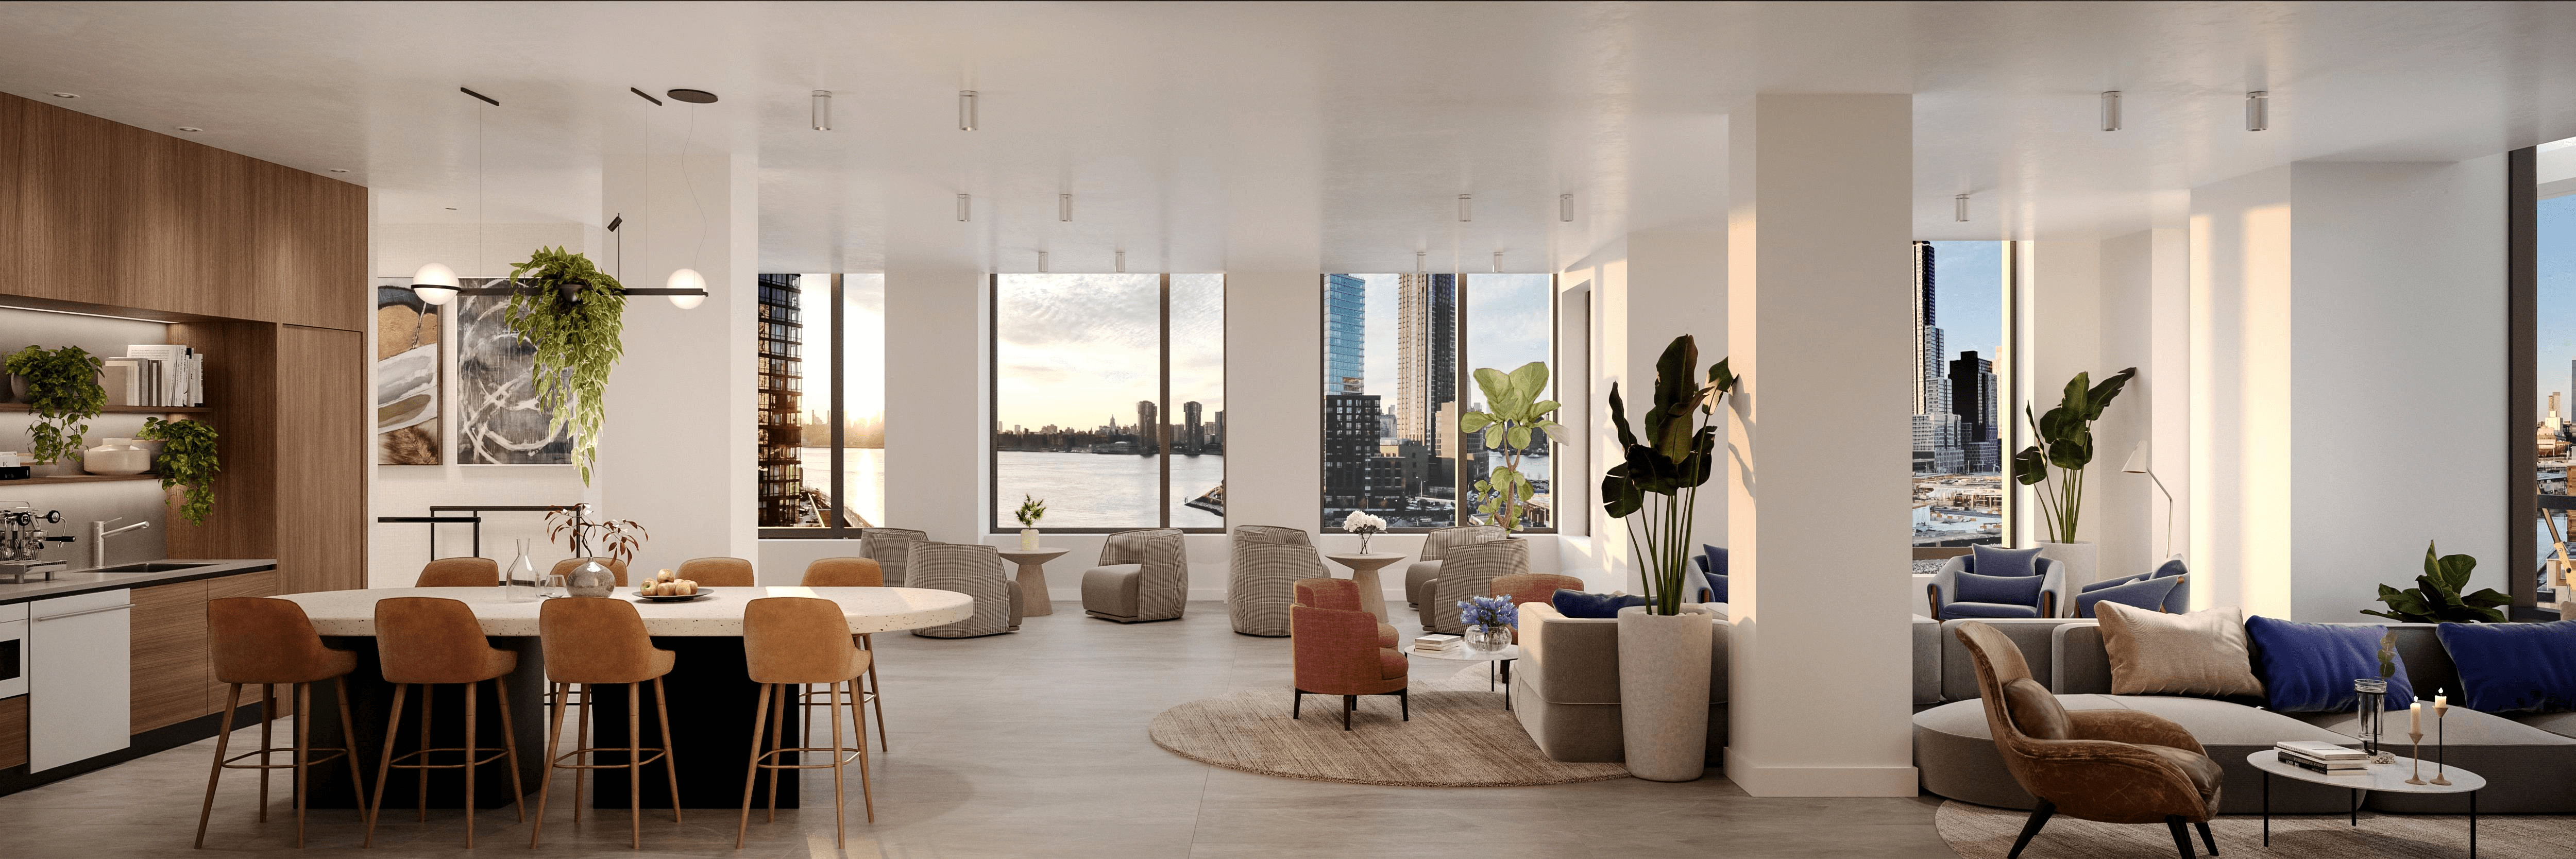 rendering of a community space with a kitchenette and windows with a manhattan skyline view